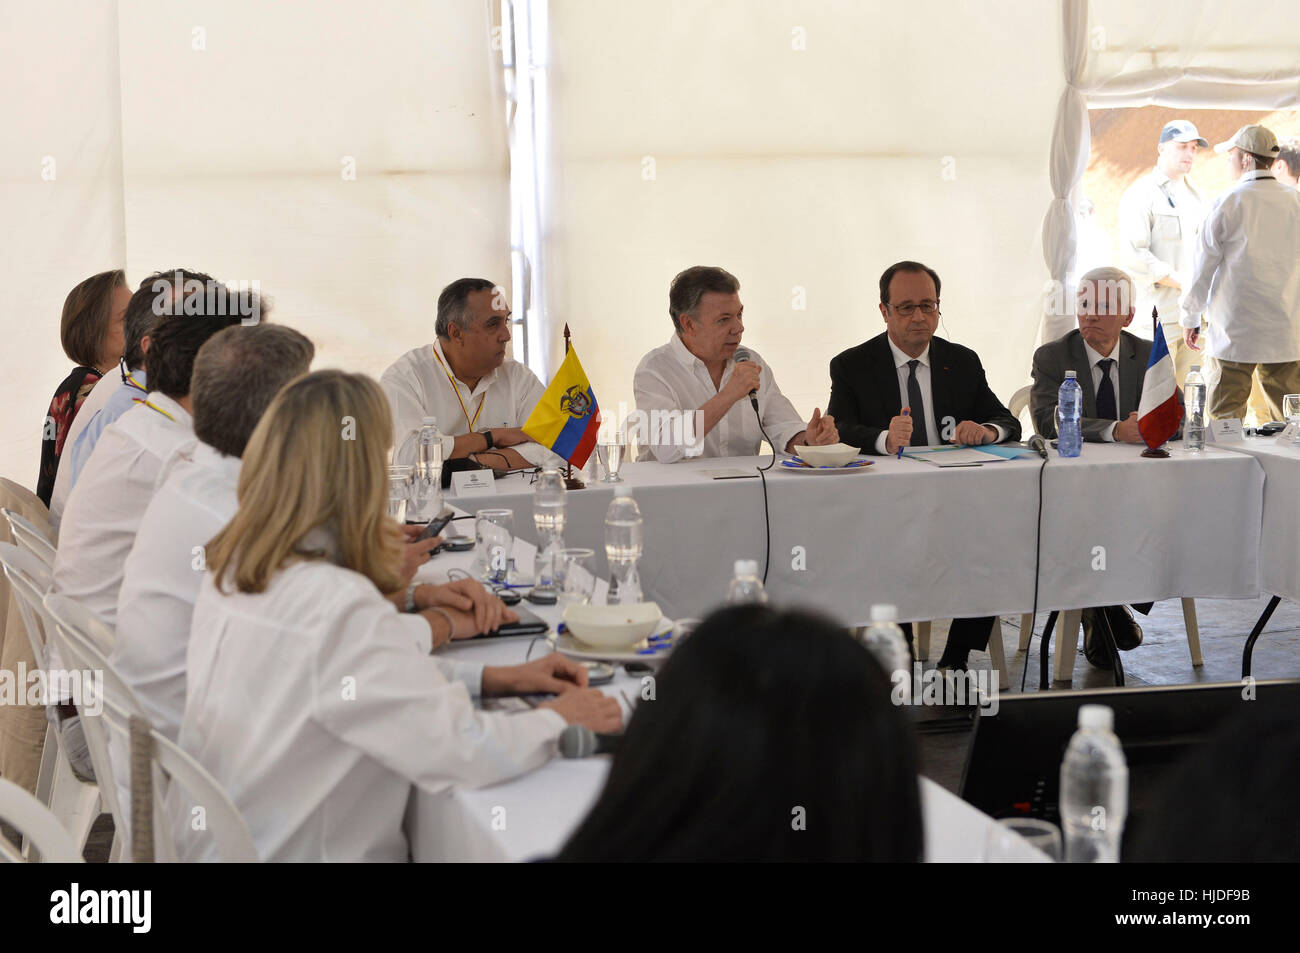 Cauca, Colombia. 24th Jan, 2017. Image provided by the Presidency of Colombia shows Colombian President Juan Manuel Santos (3rd R rear) and his French counterpart Francois Hollande (2nd R rear) attending a meeting during their visit to the demobilization camp in La Venta, the municipality of Caldono, Colombia, on Jan. 24, 2017. Credit: Juan David Tena/Colombia's Presidency/Xinhua/Alamy Live News Stock Photo